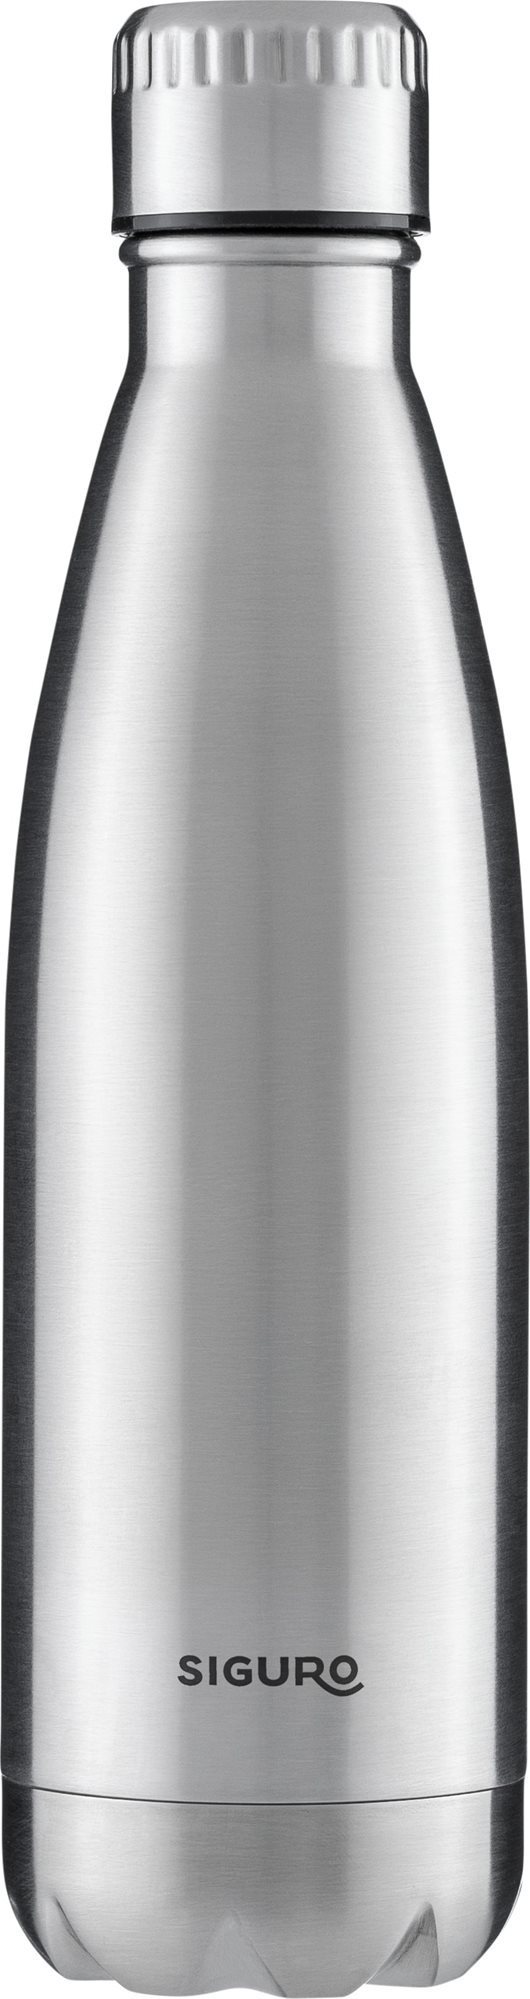 Siguro TH-B15 Travel Bottle Stainless Steel